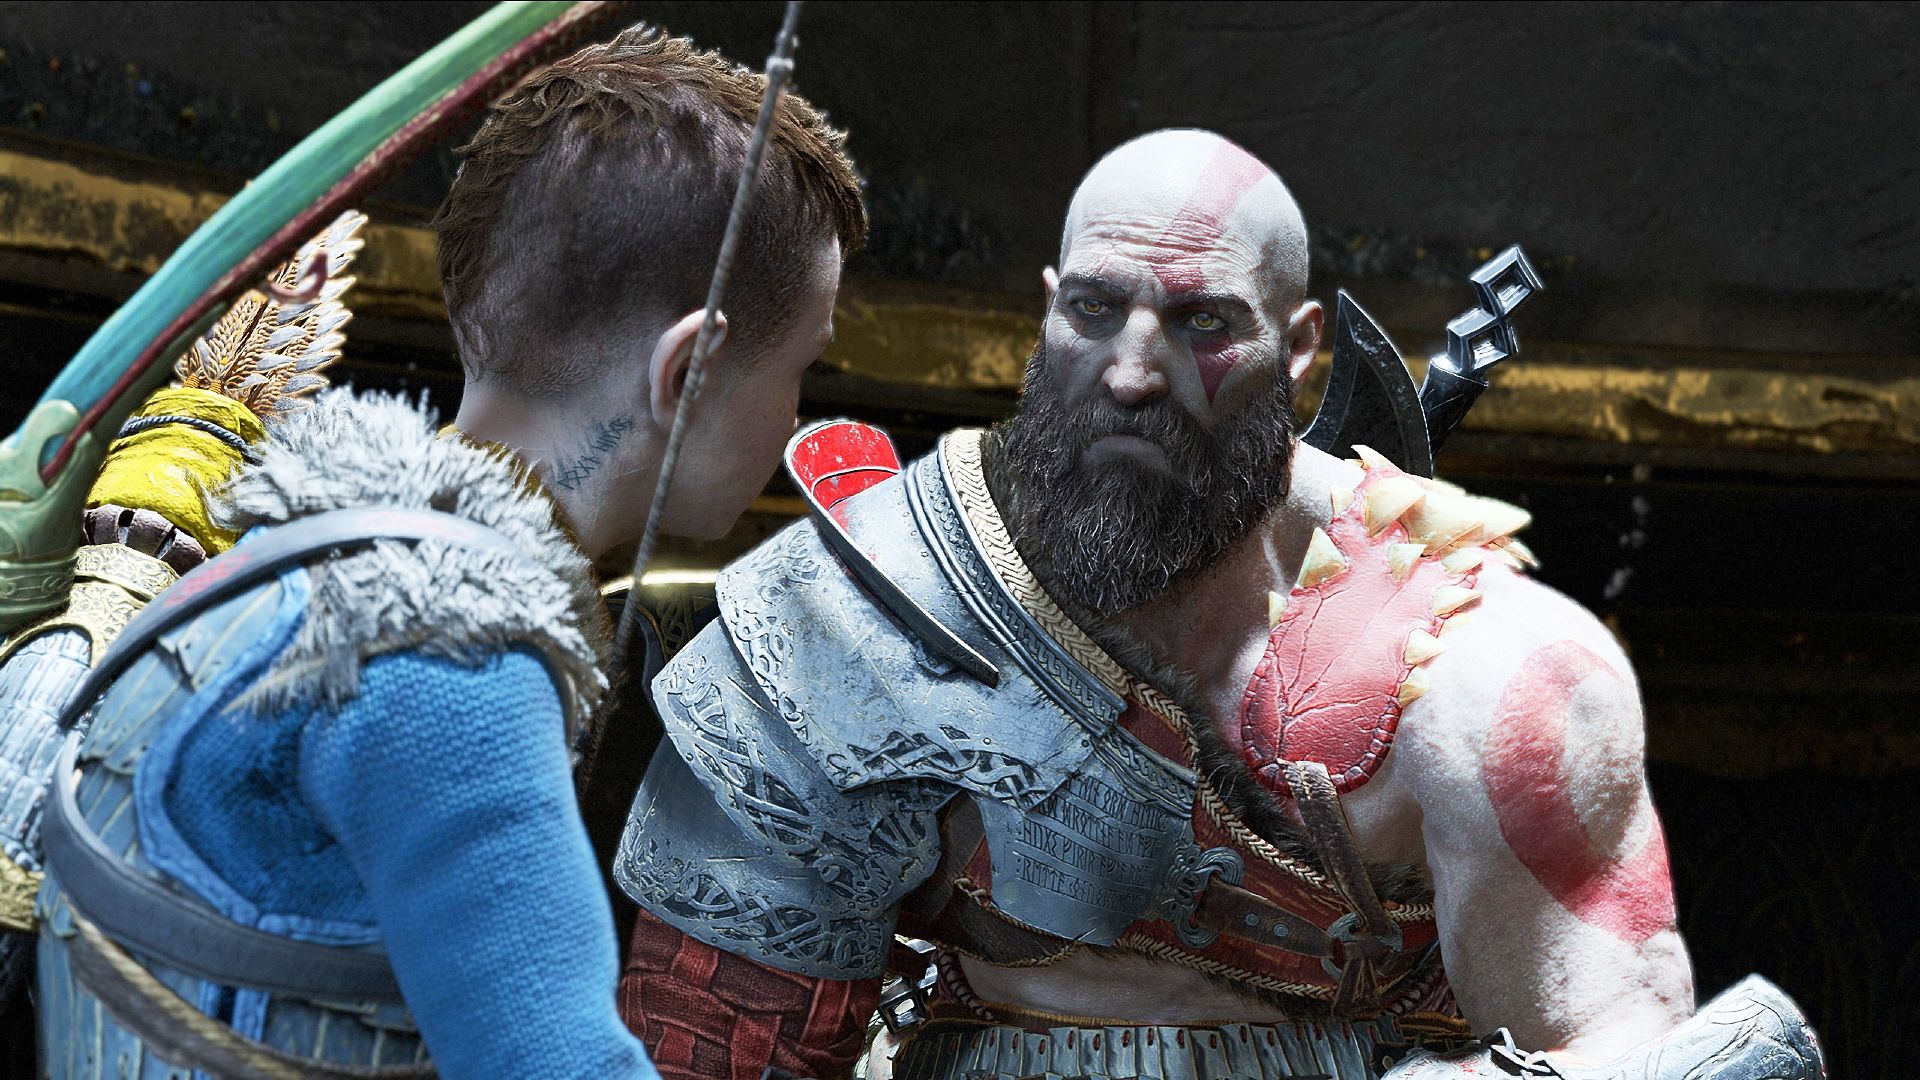 Review: God of War: Ghost of Sparta